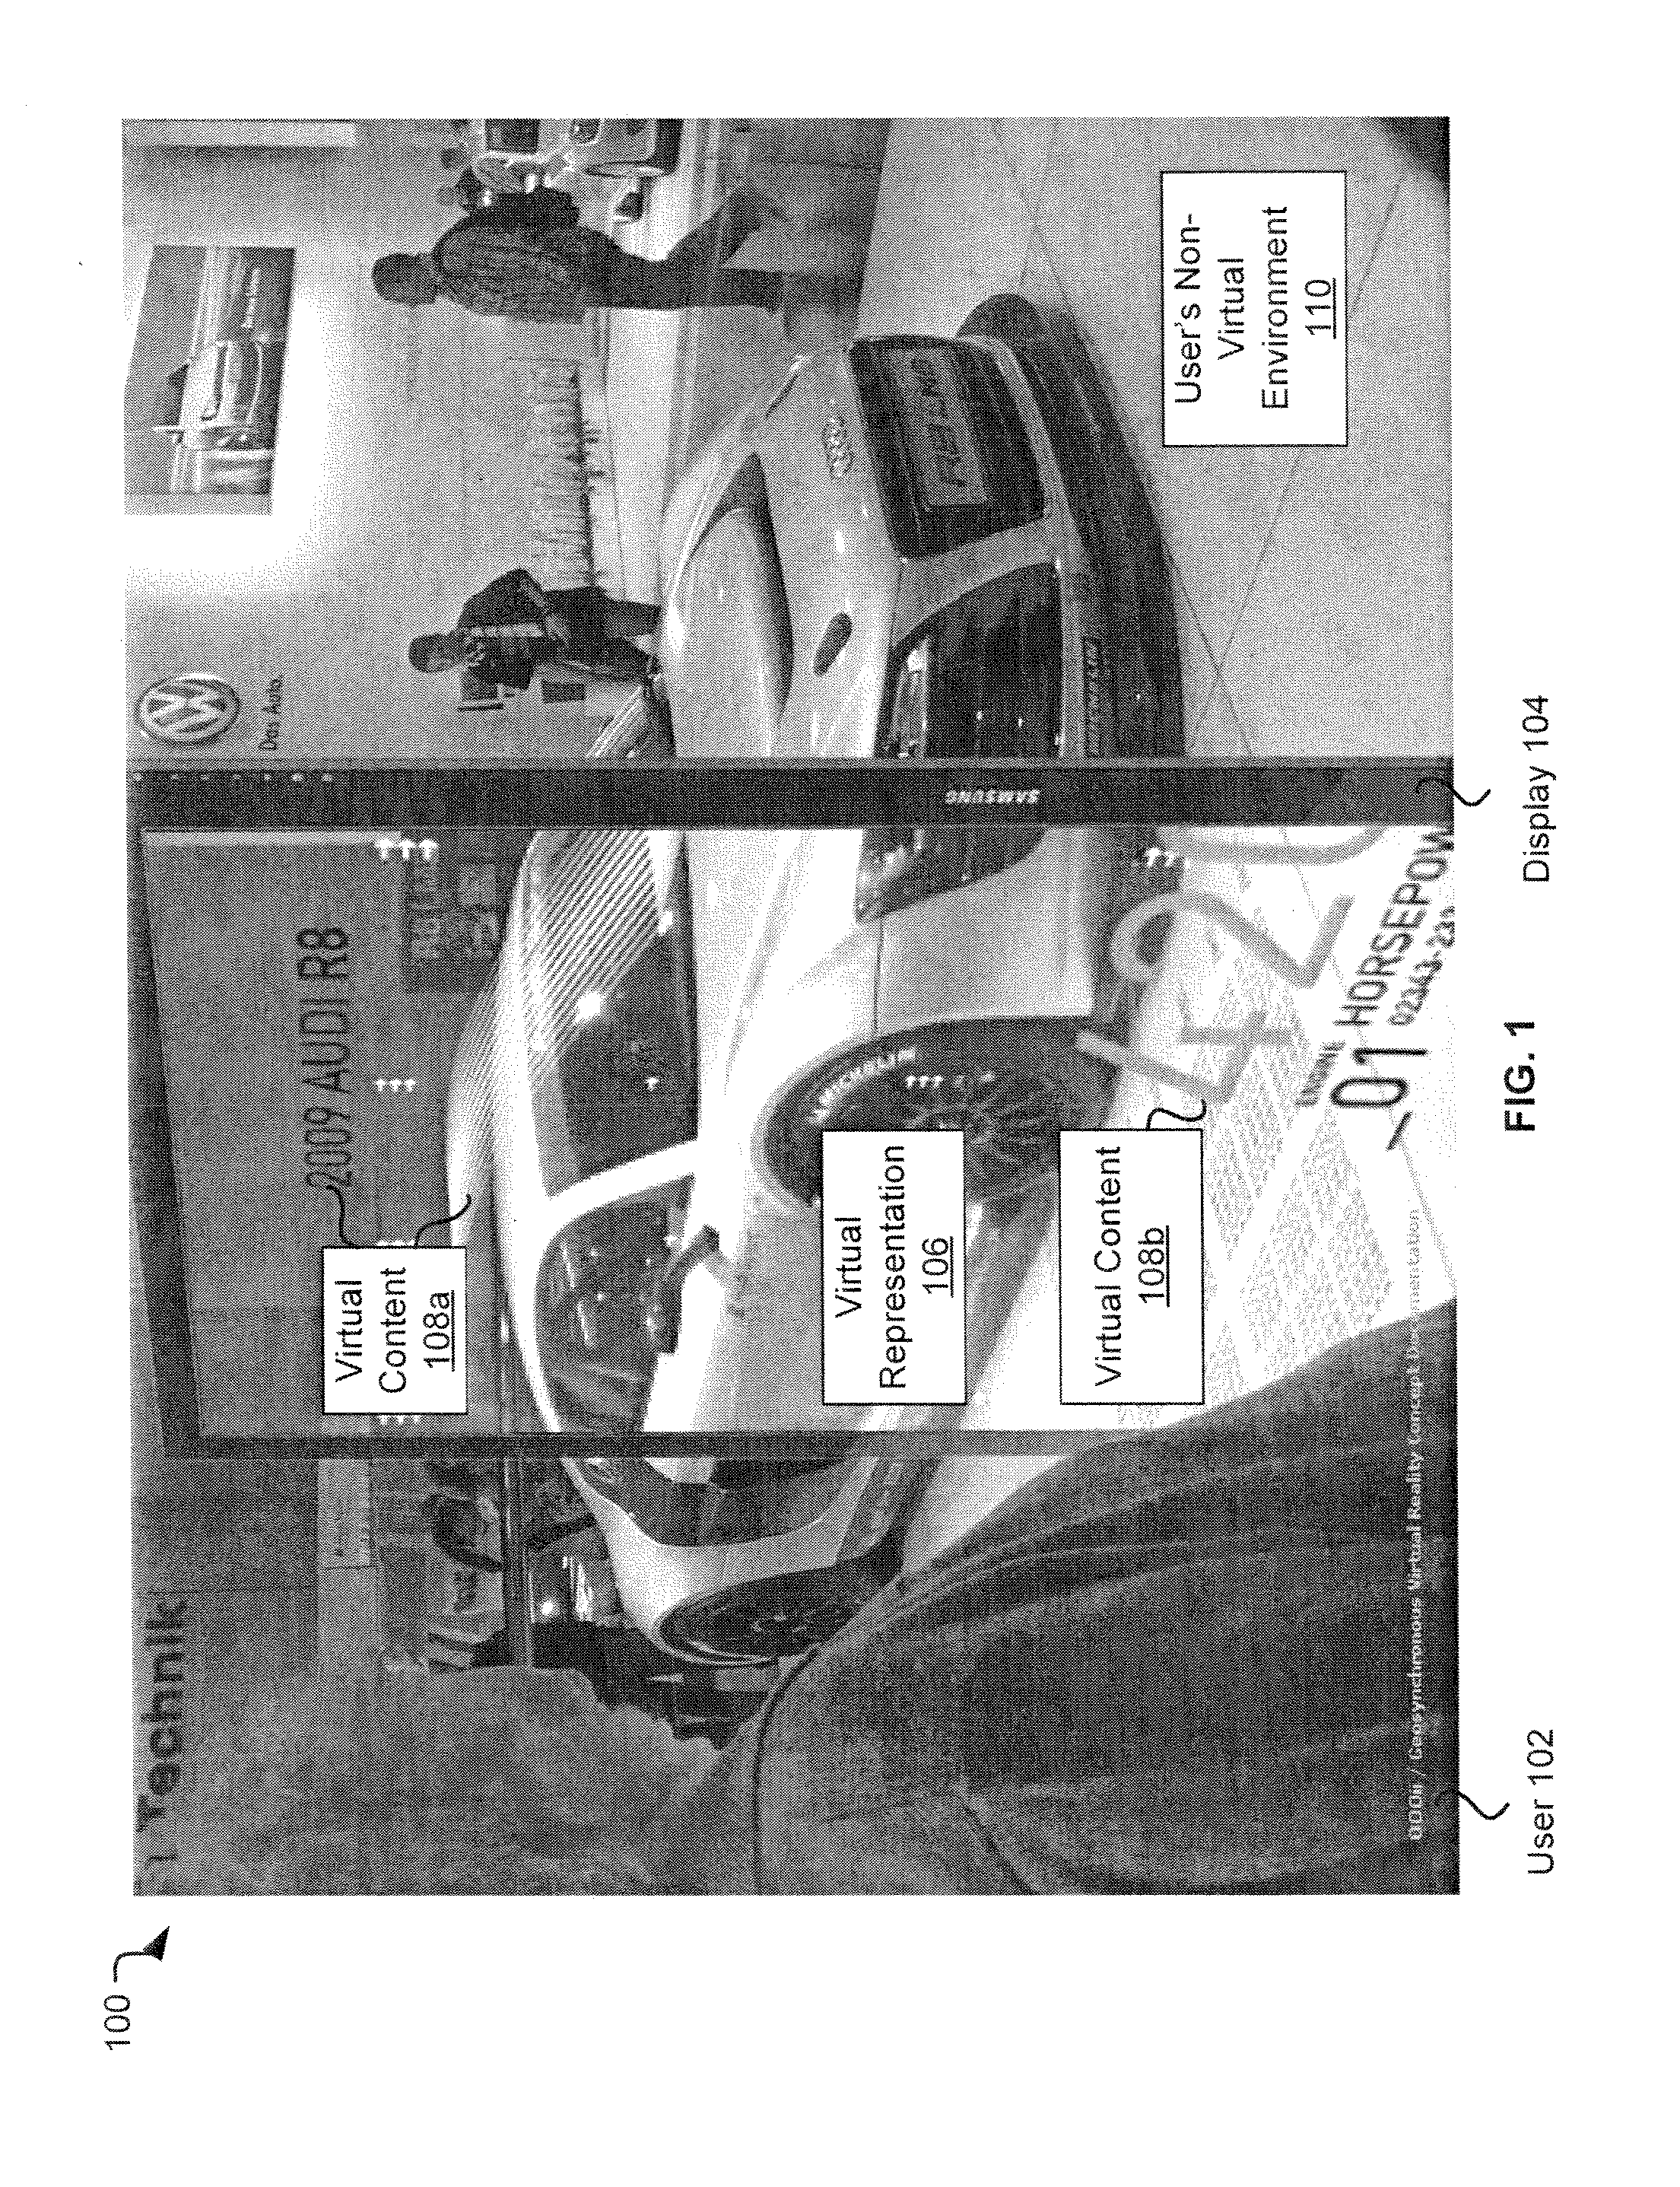 Head and arm detection for virtual immersion systems and methods